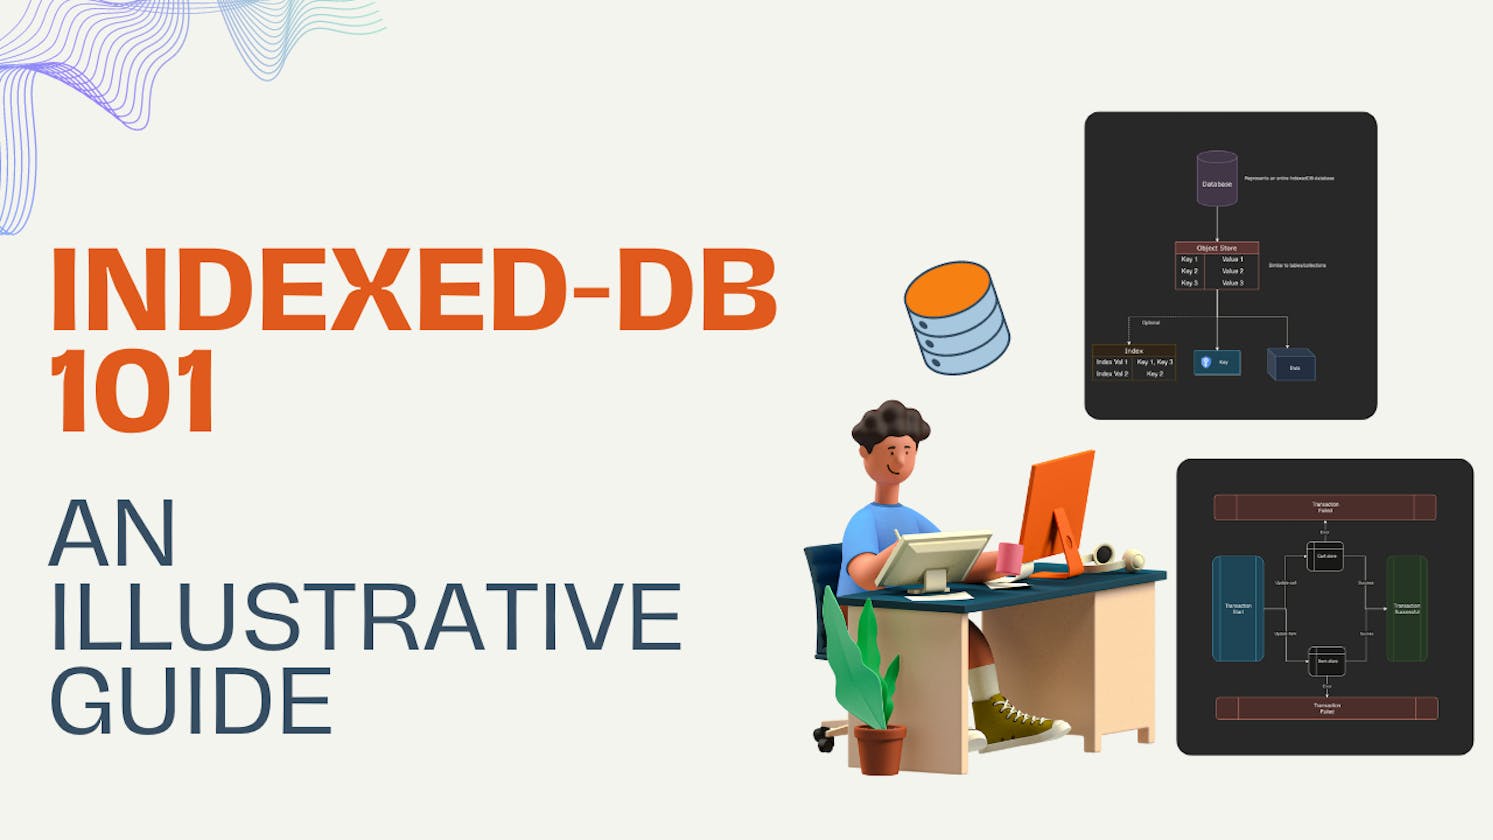 Beginner's Guide to IndexedDB: Illustrated with Easy-to-Follow Block Diagrams